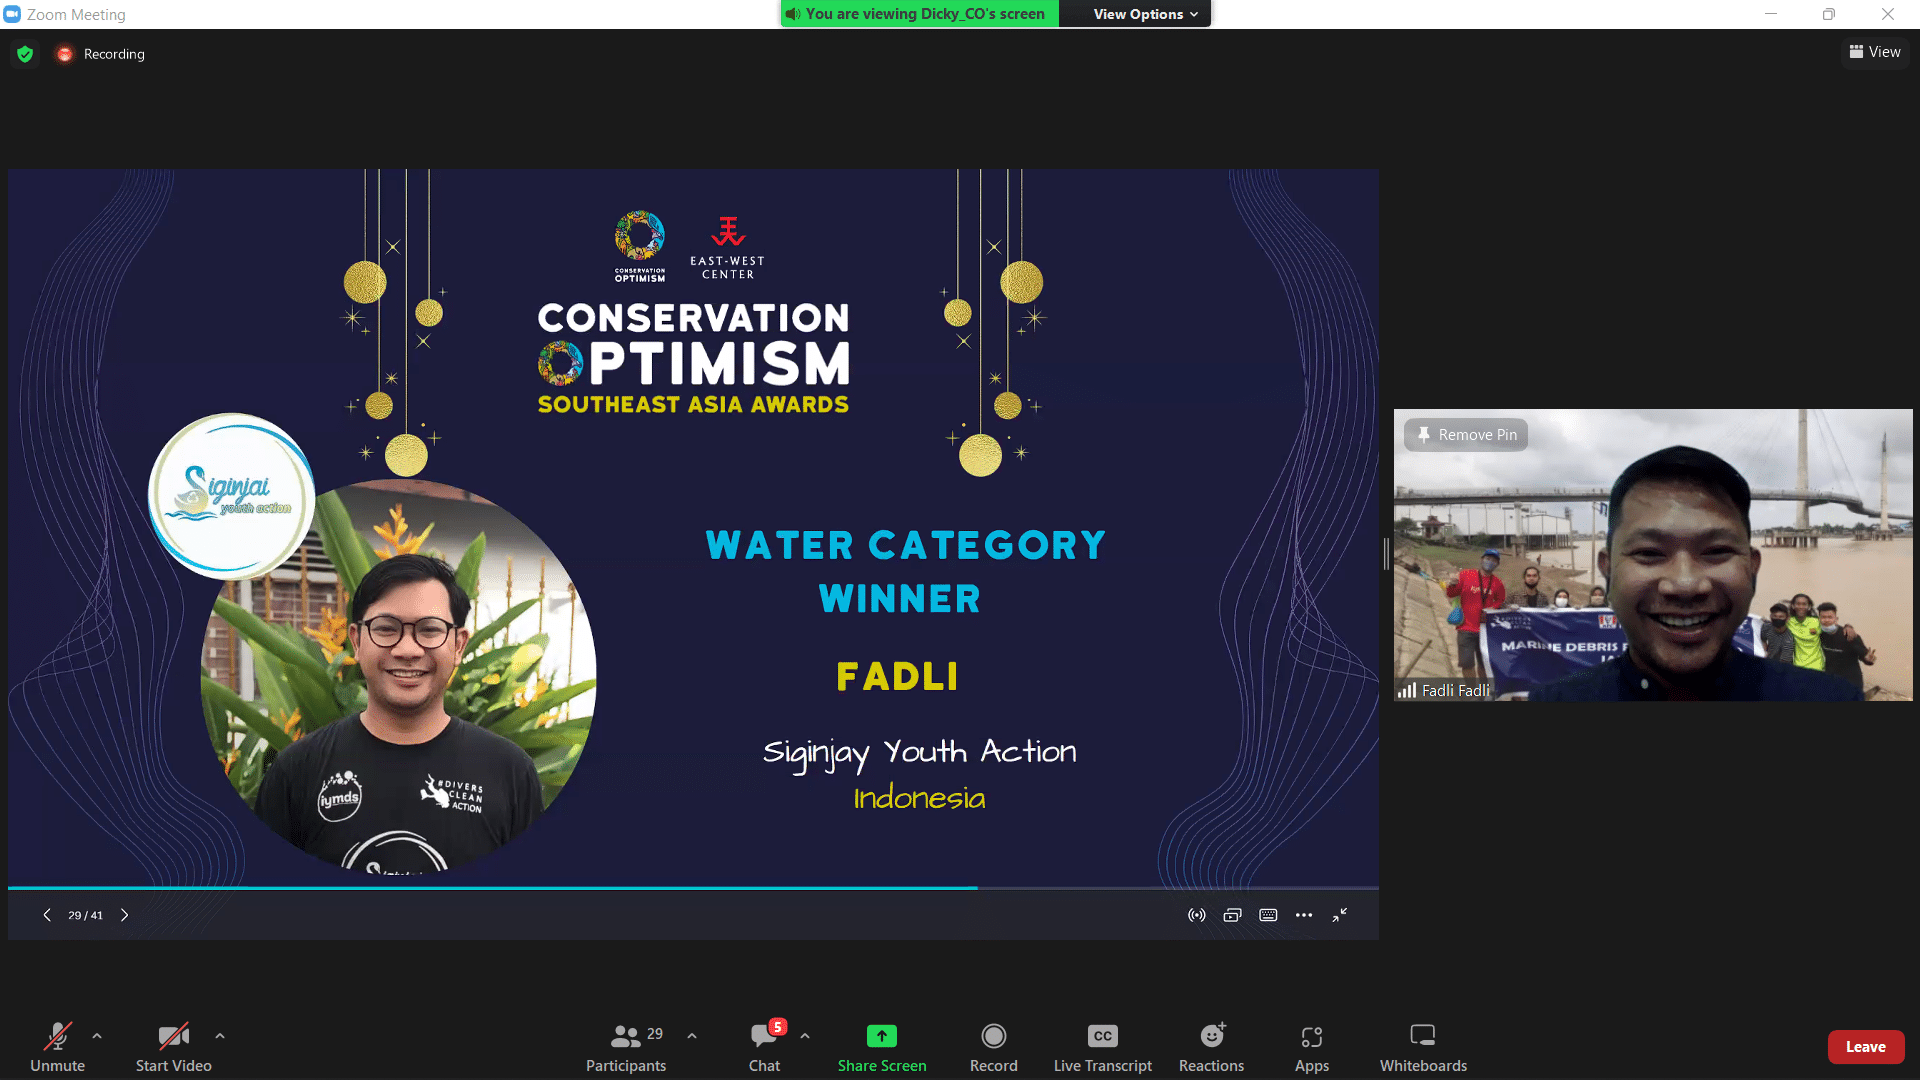 Fadli Azmi was awarded for his work on Siginjai Youth Action in Indonesia